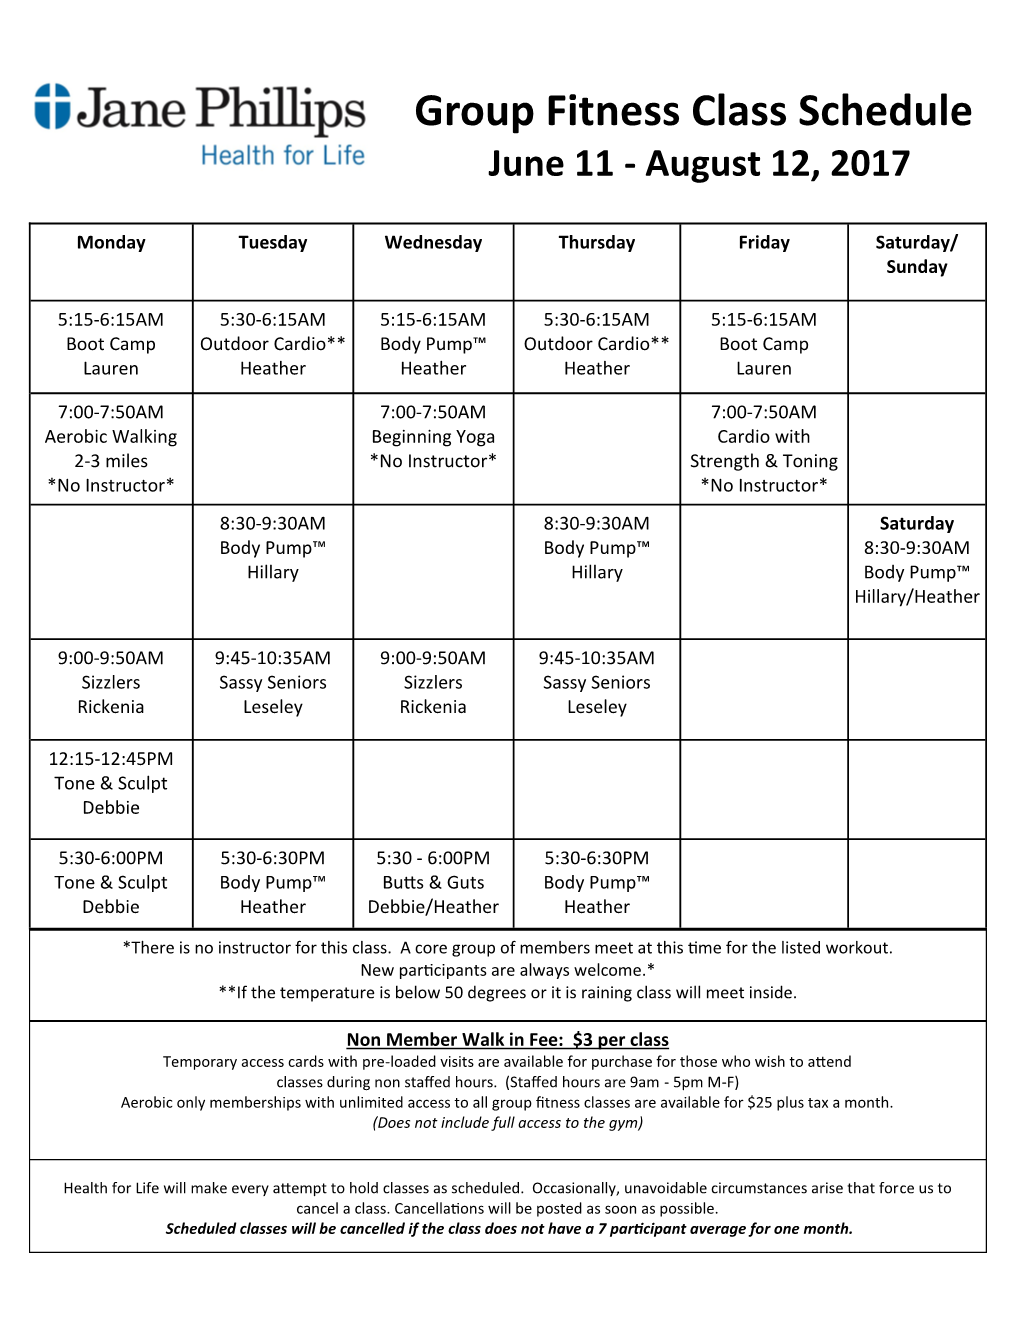 Group Fitness Class Schedule June 11 - August 12, 2017